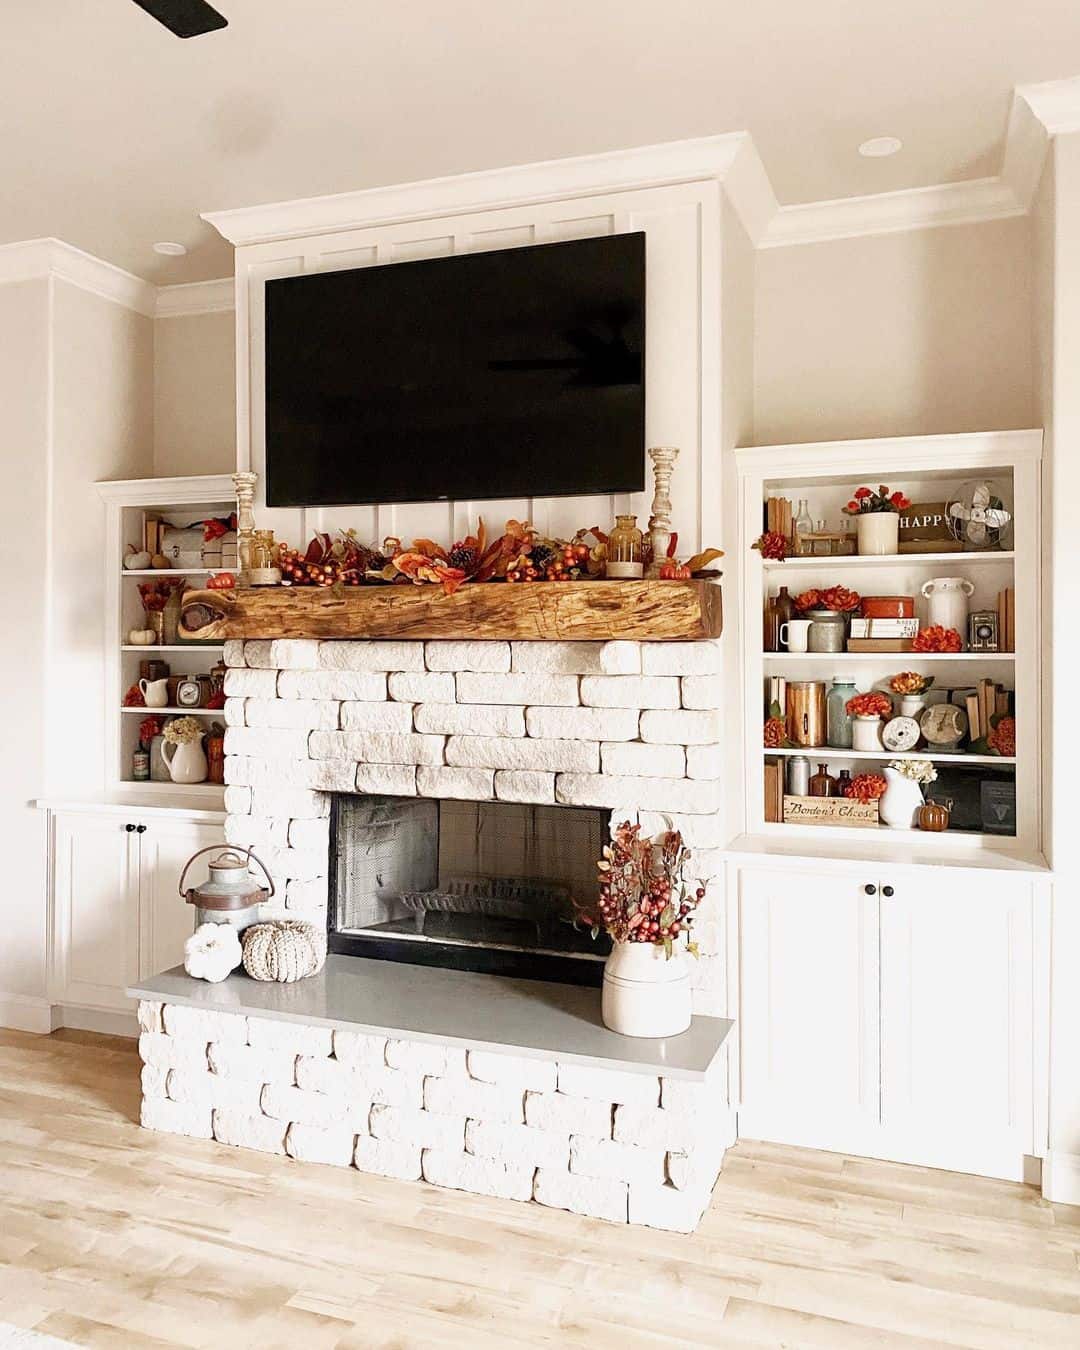 Stone Fireplace With Built Ins On Each Side 